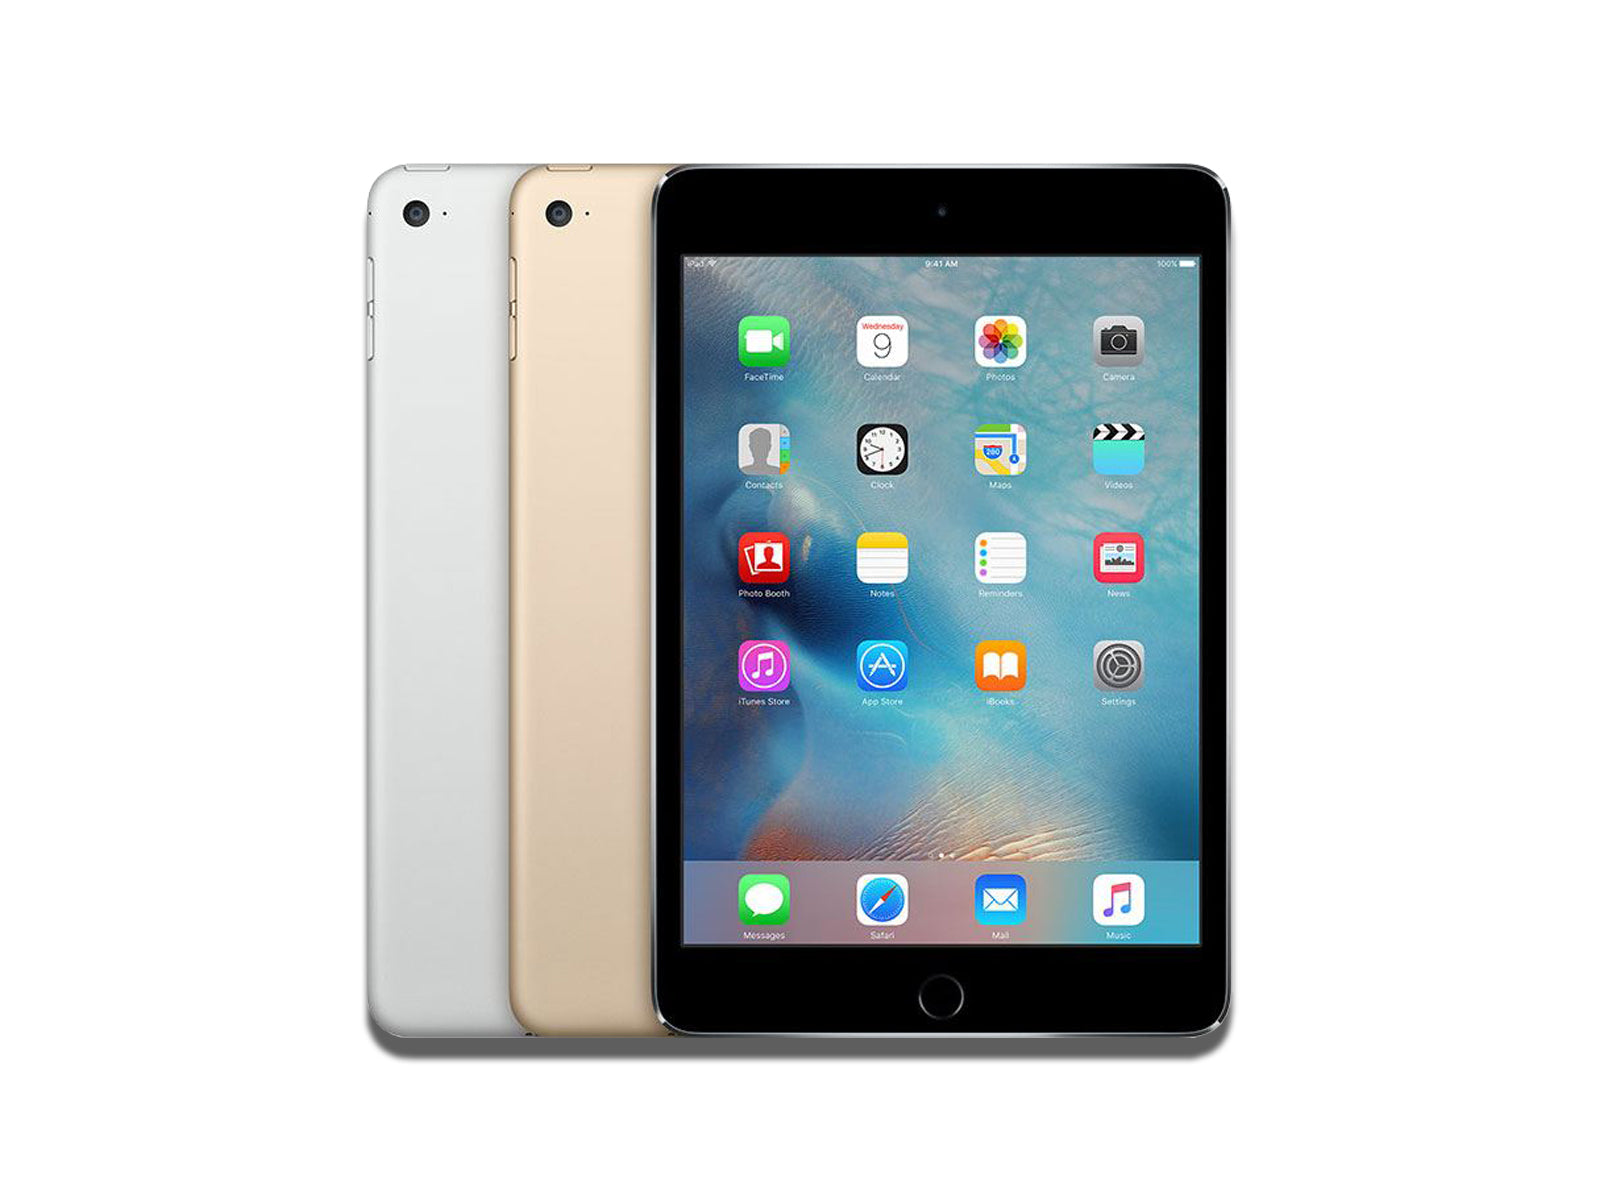 iPad mini 4th Gen 2015 colour variants on the white background